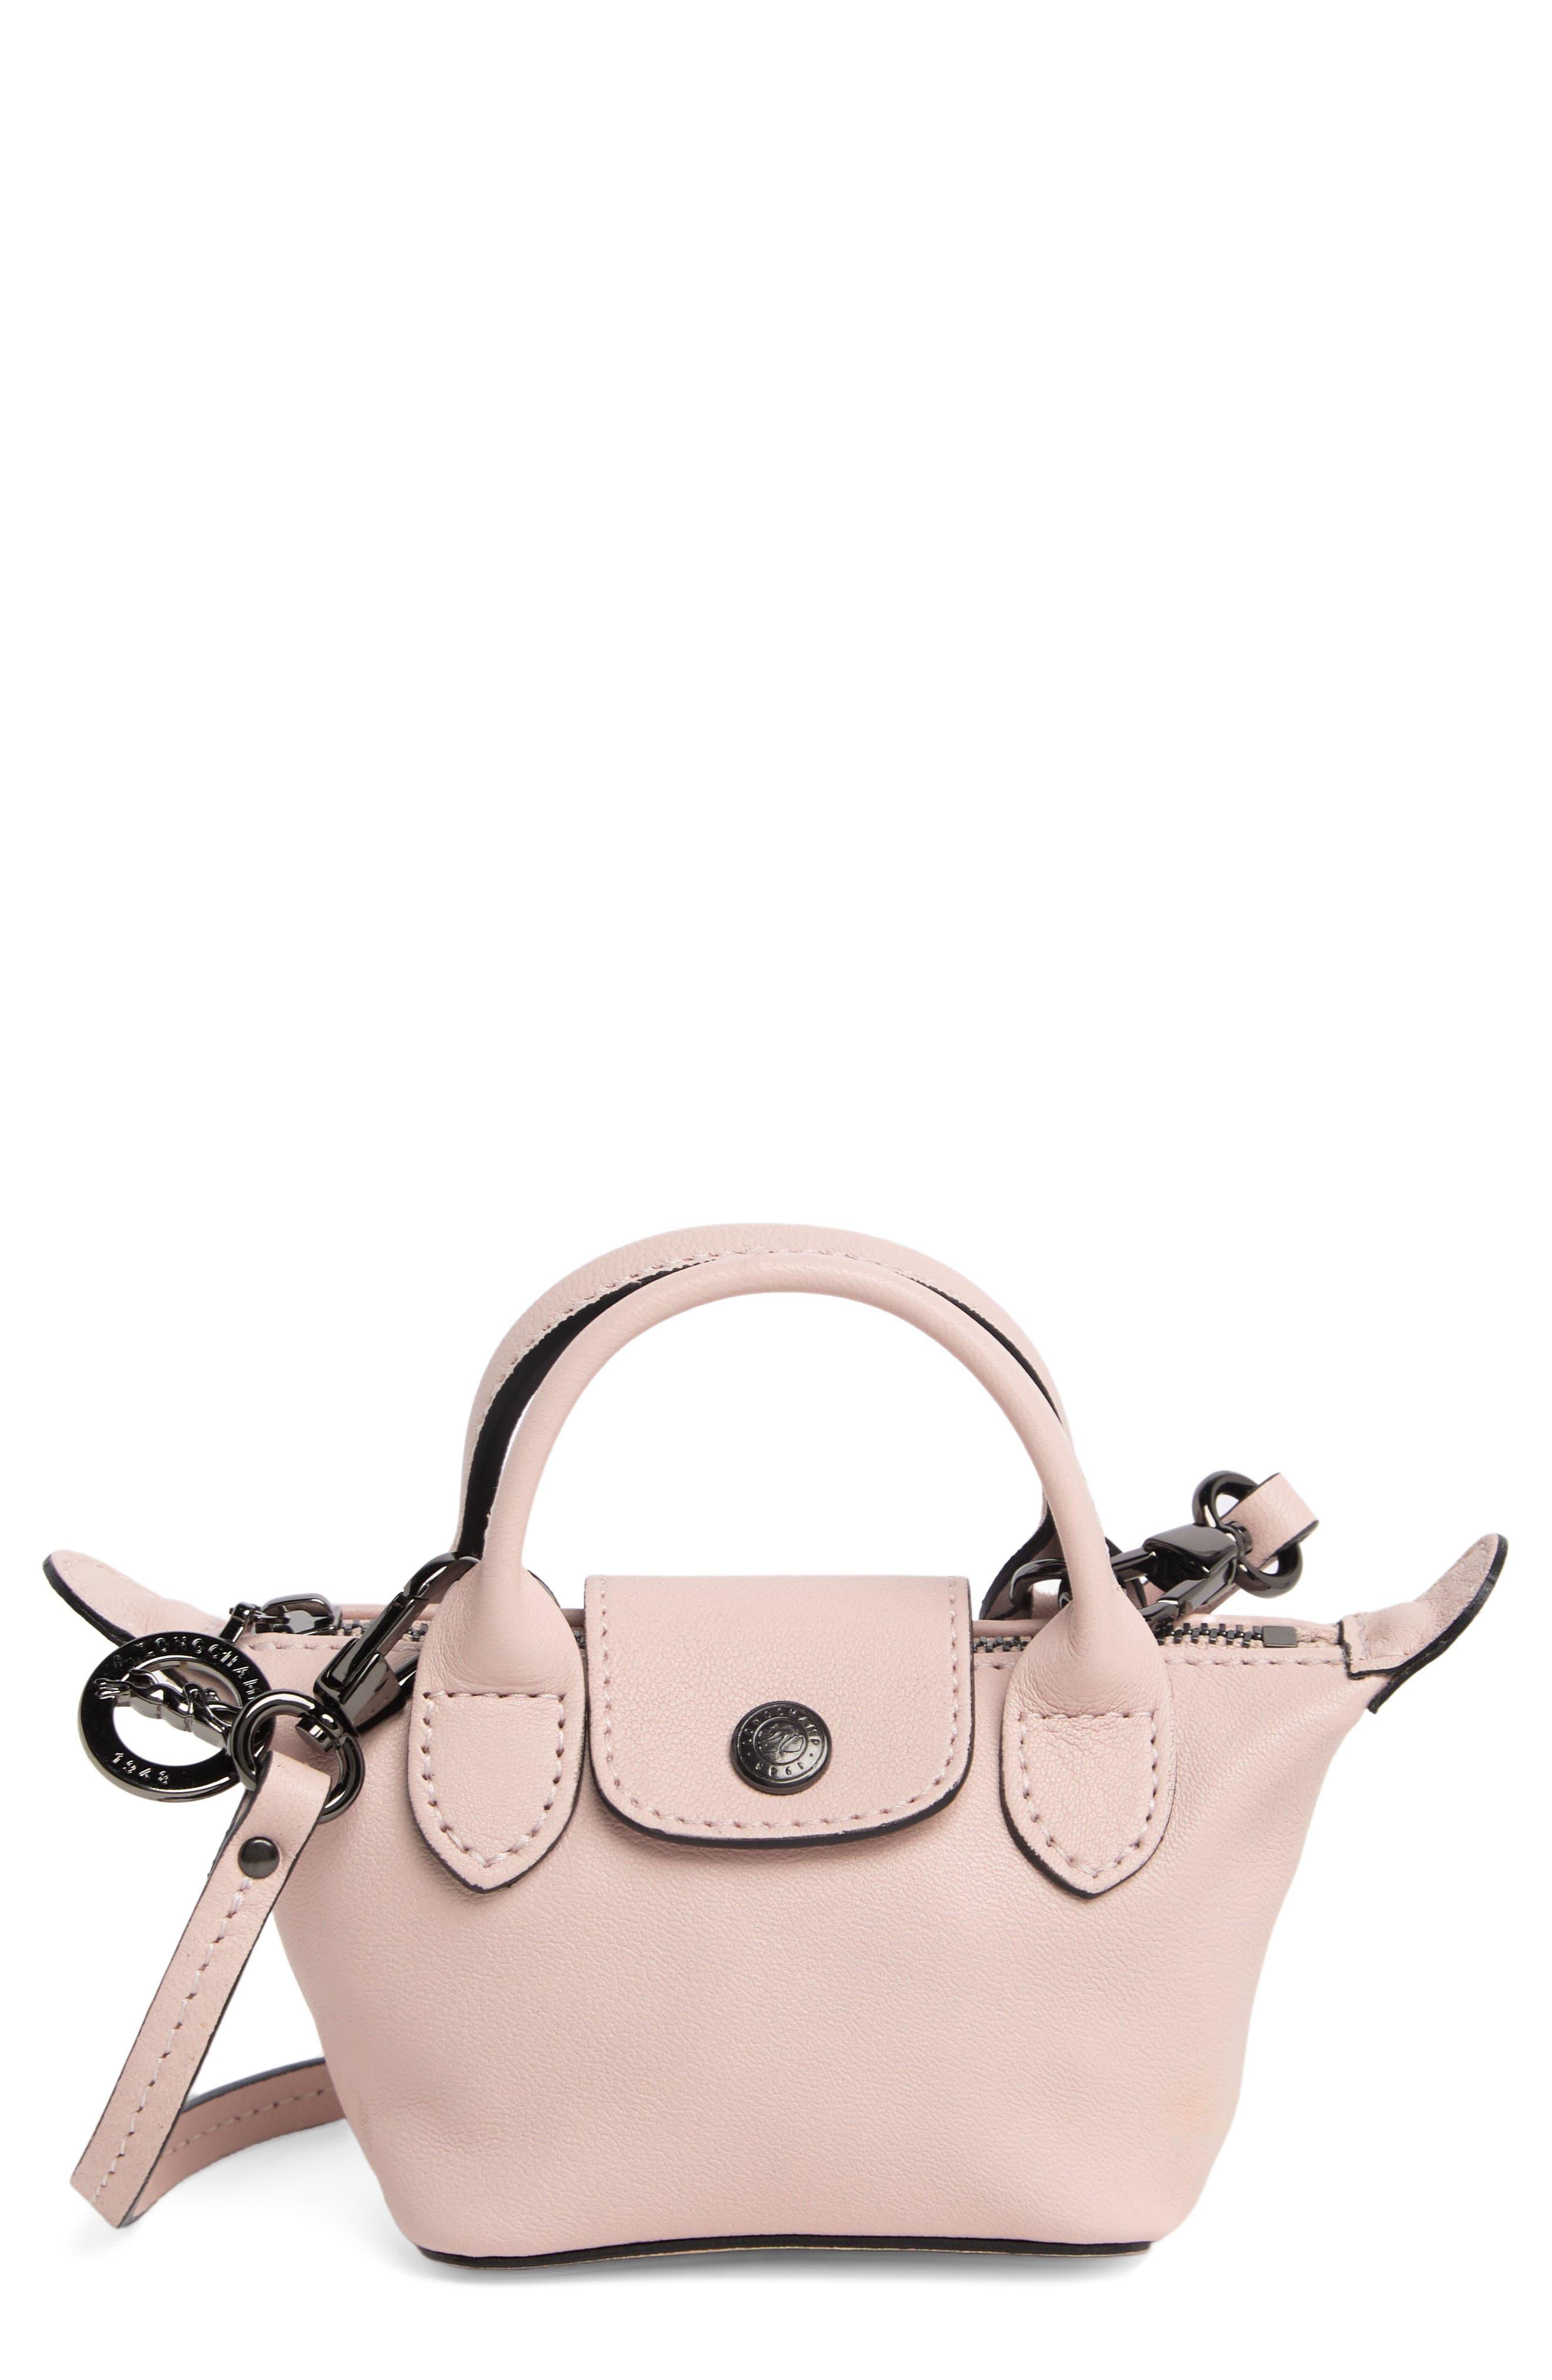 Longchamp Le Pliage Leather Top Handle Crossbody Bag in Pink | Lyst